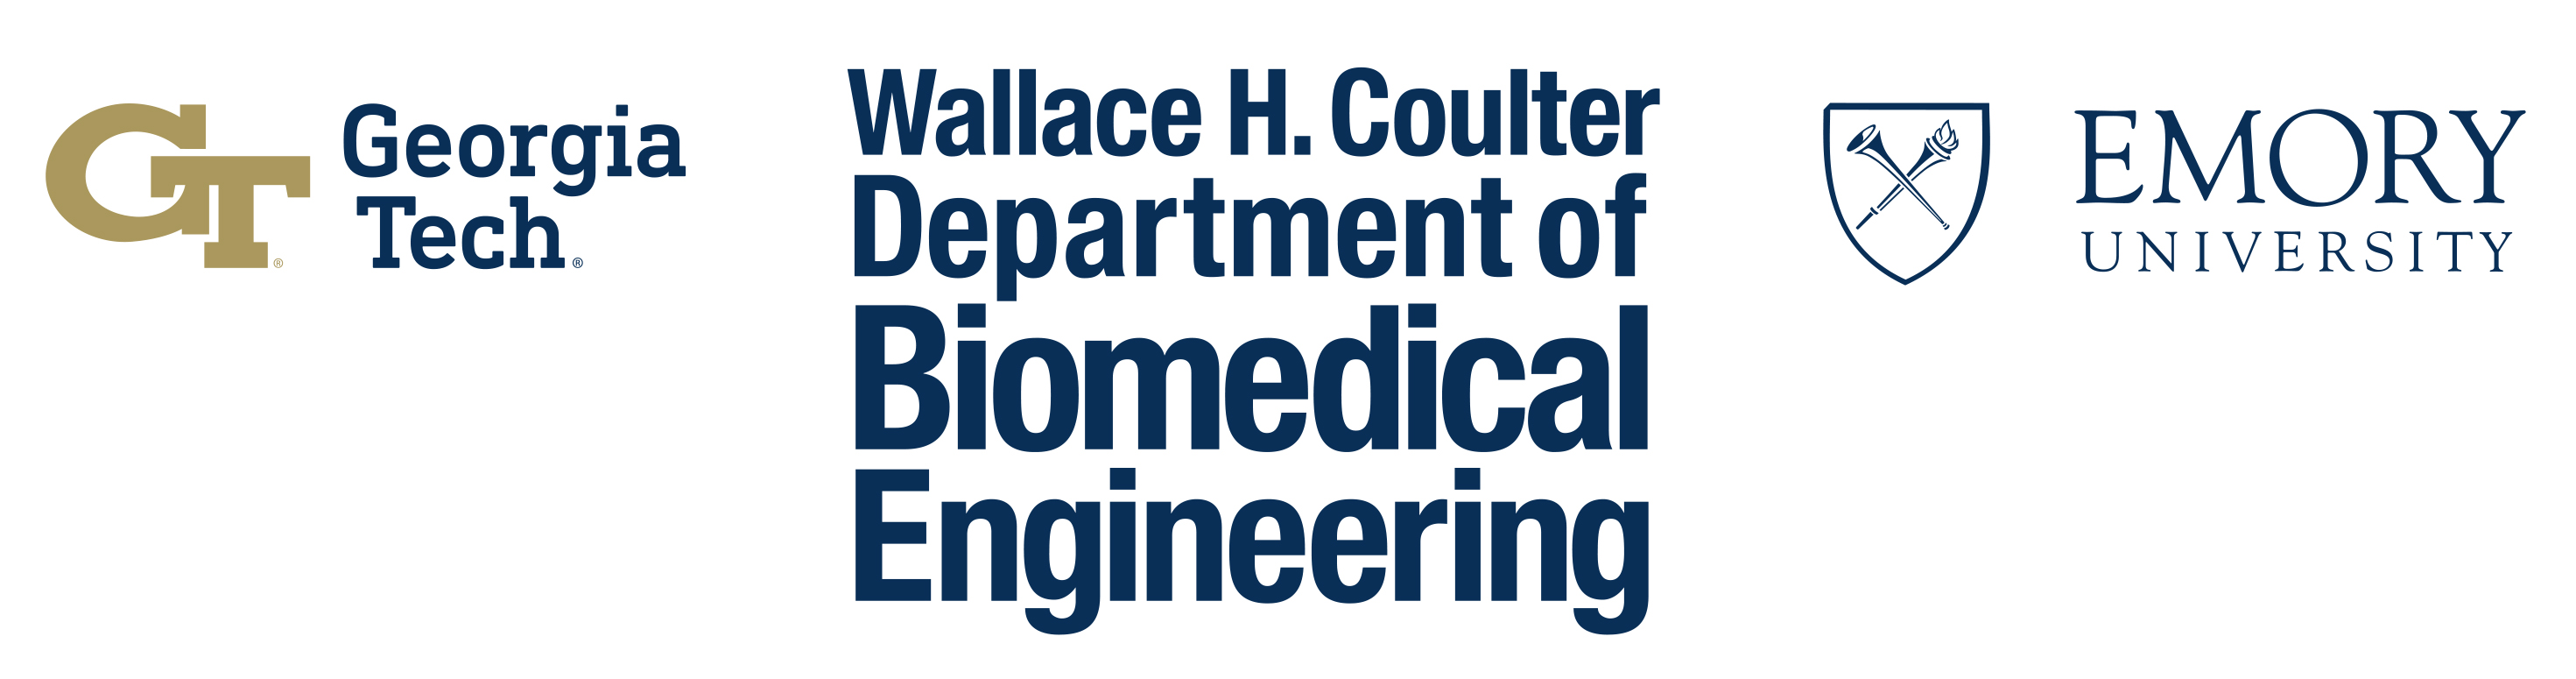 Wallace H Coulter Department of Biomedical Engineering at Georgia Tech and Emory University logo